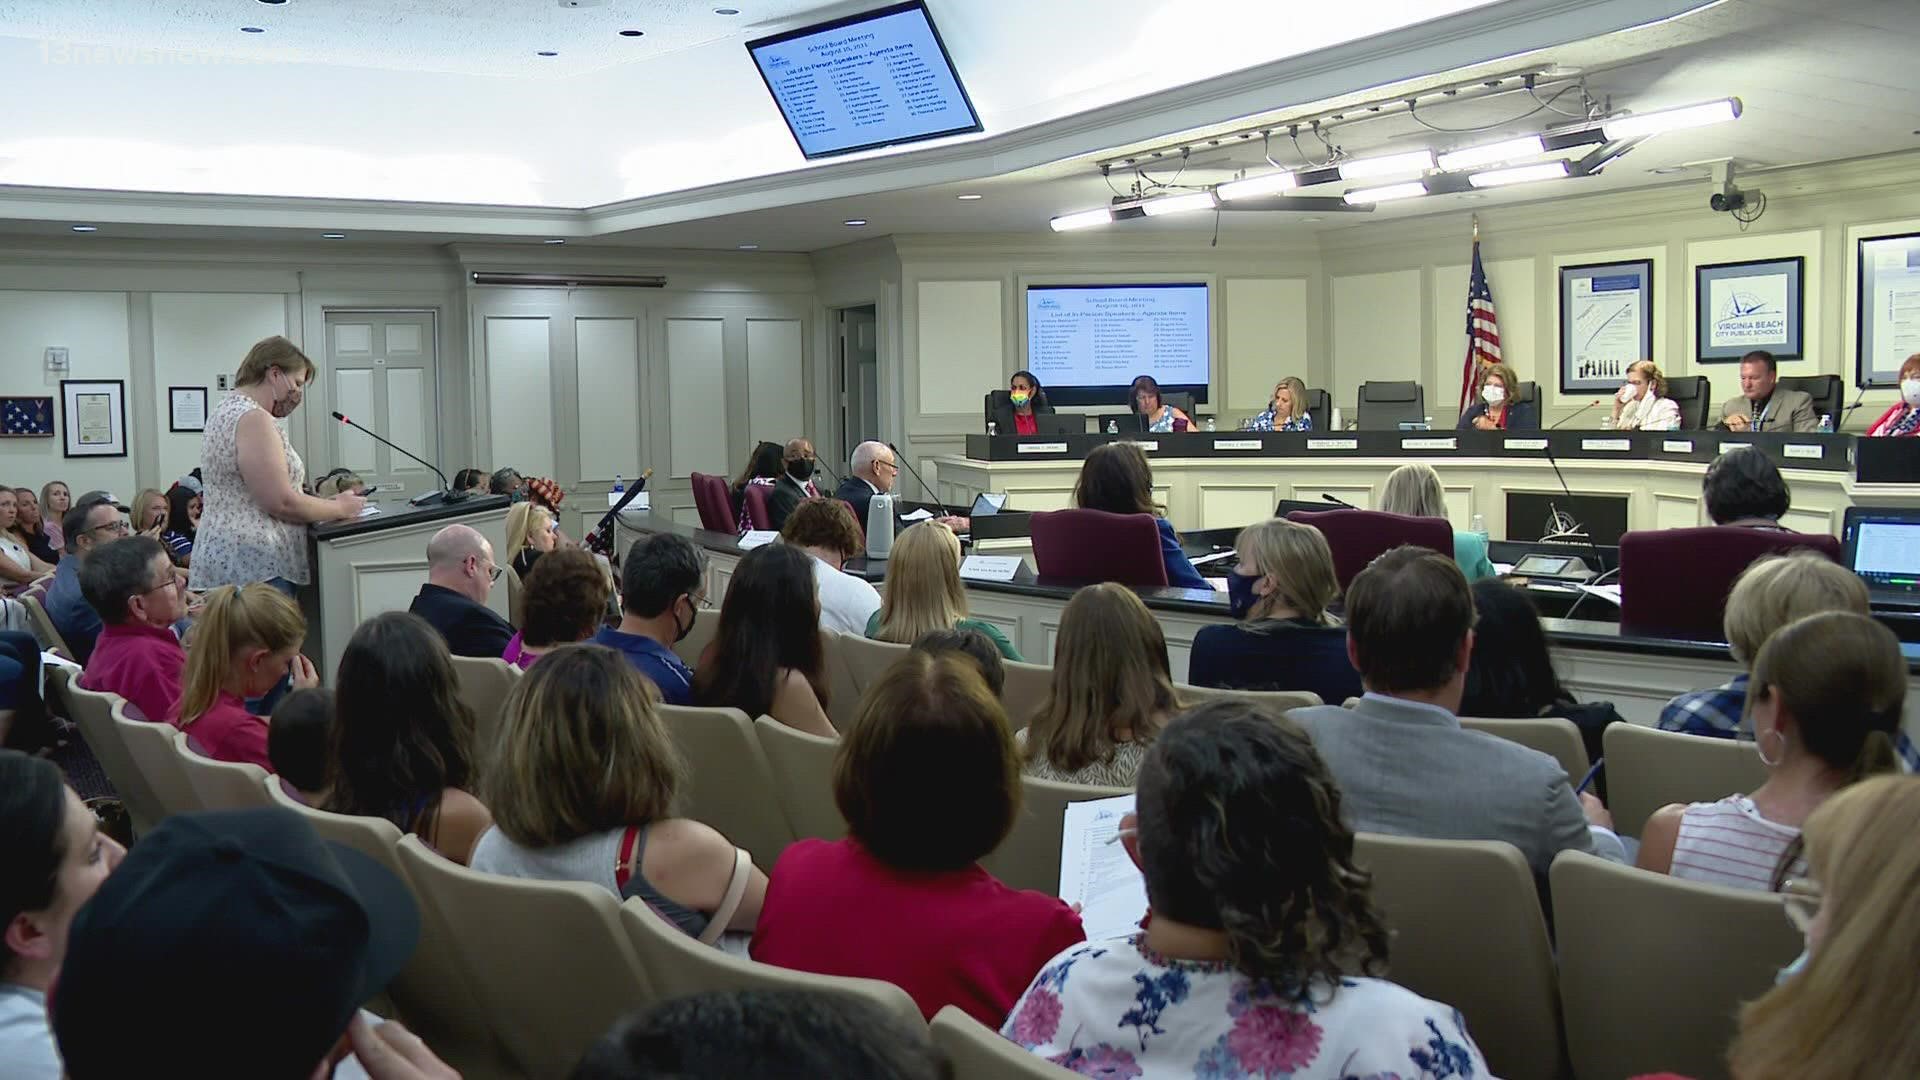 After 8 hours of discussion, the Virginia Beach City Public School Board decided to vote against making masks optional for the upcoming school year.